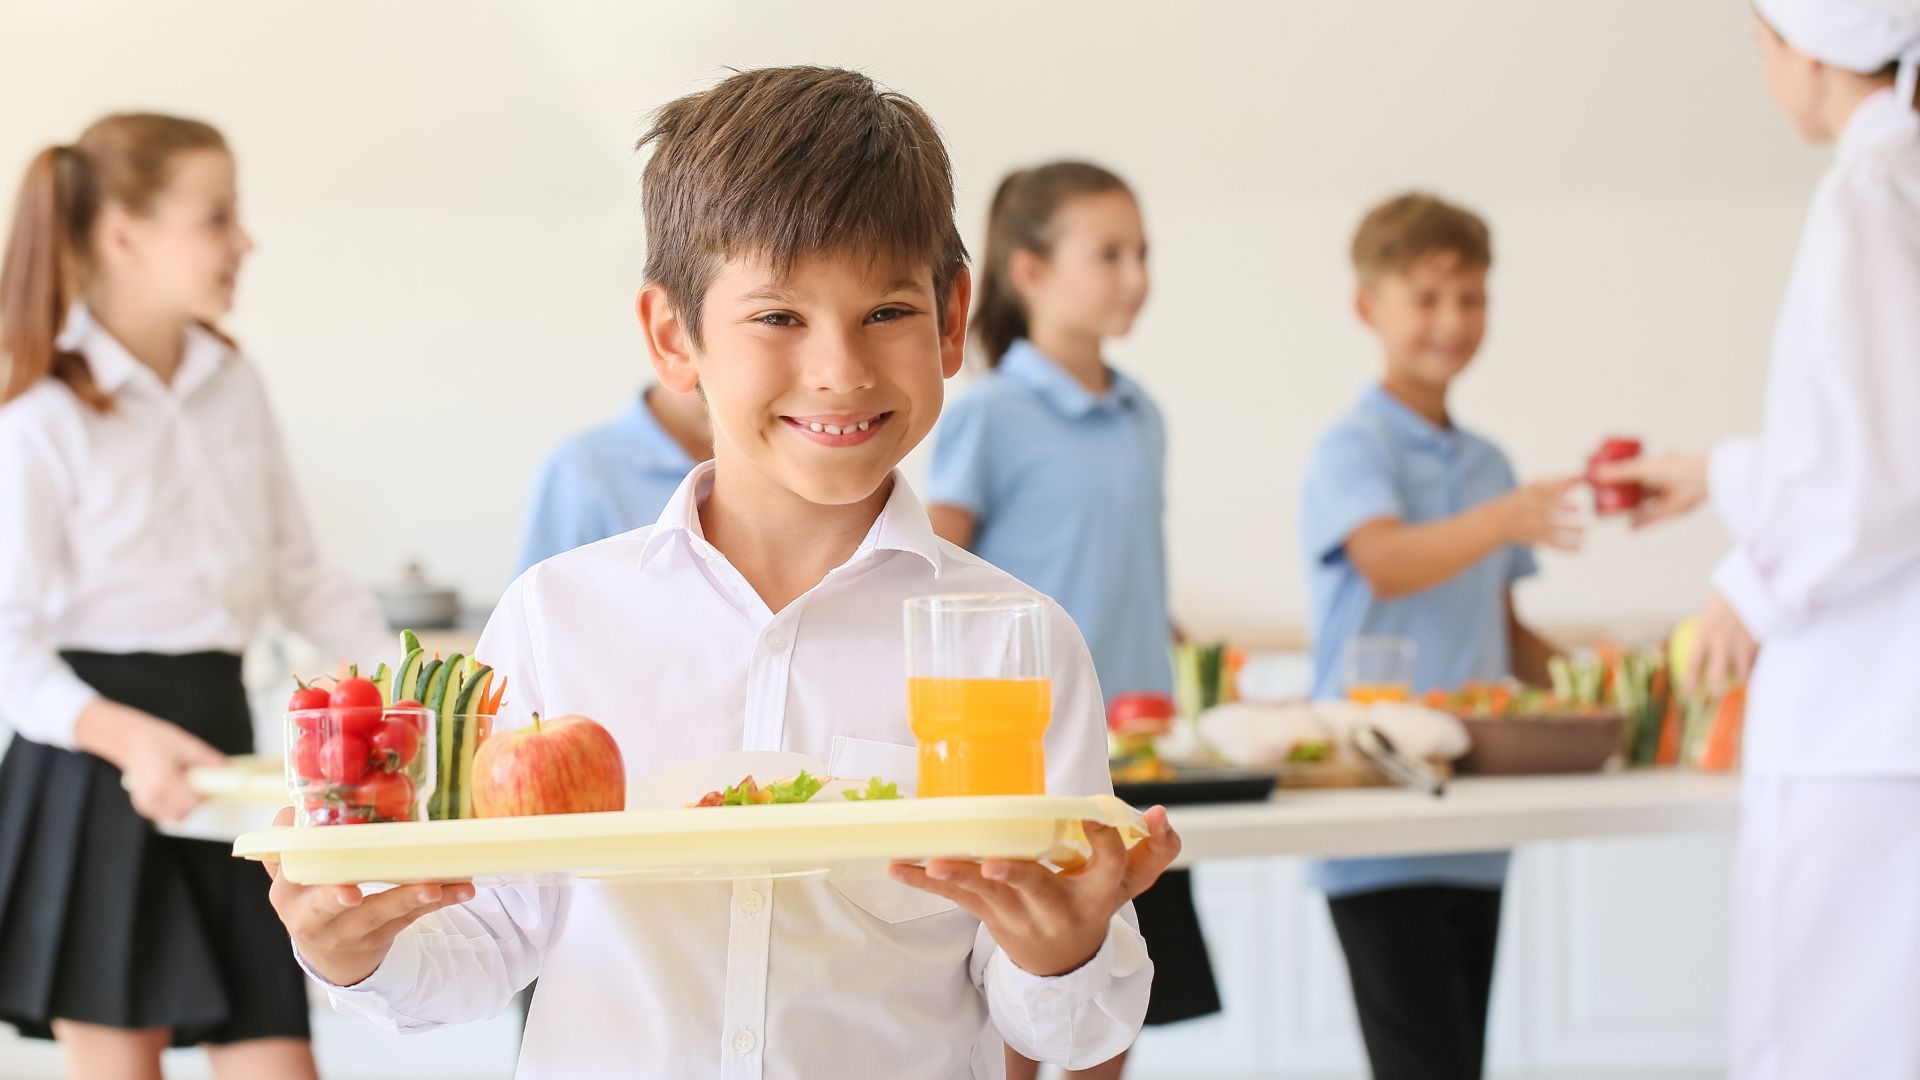 School food consulting